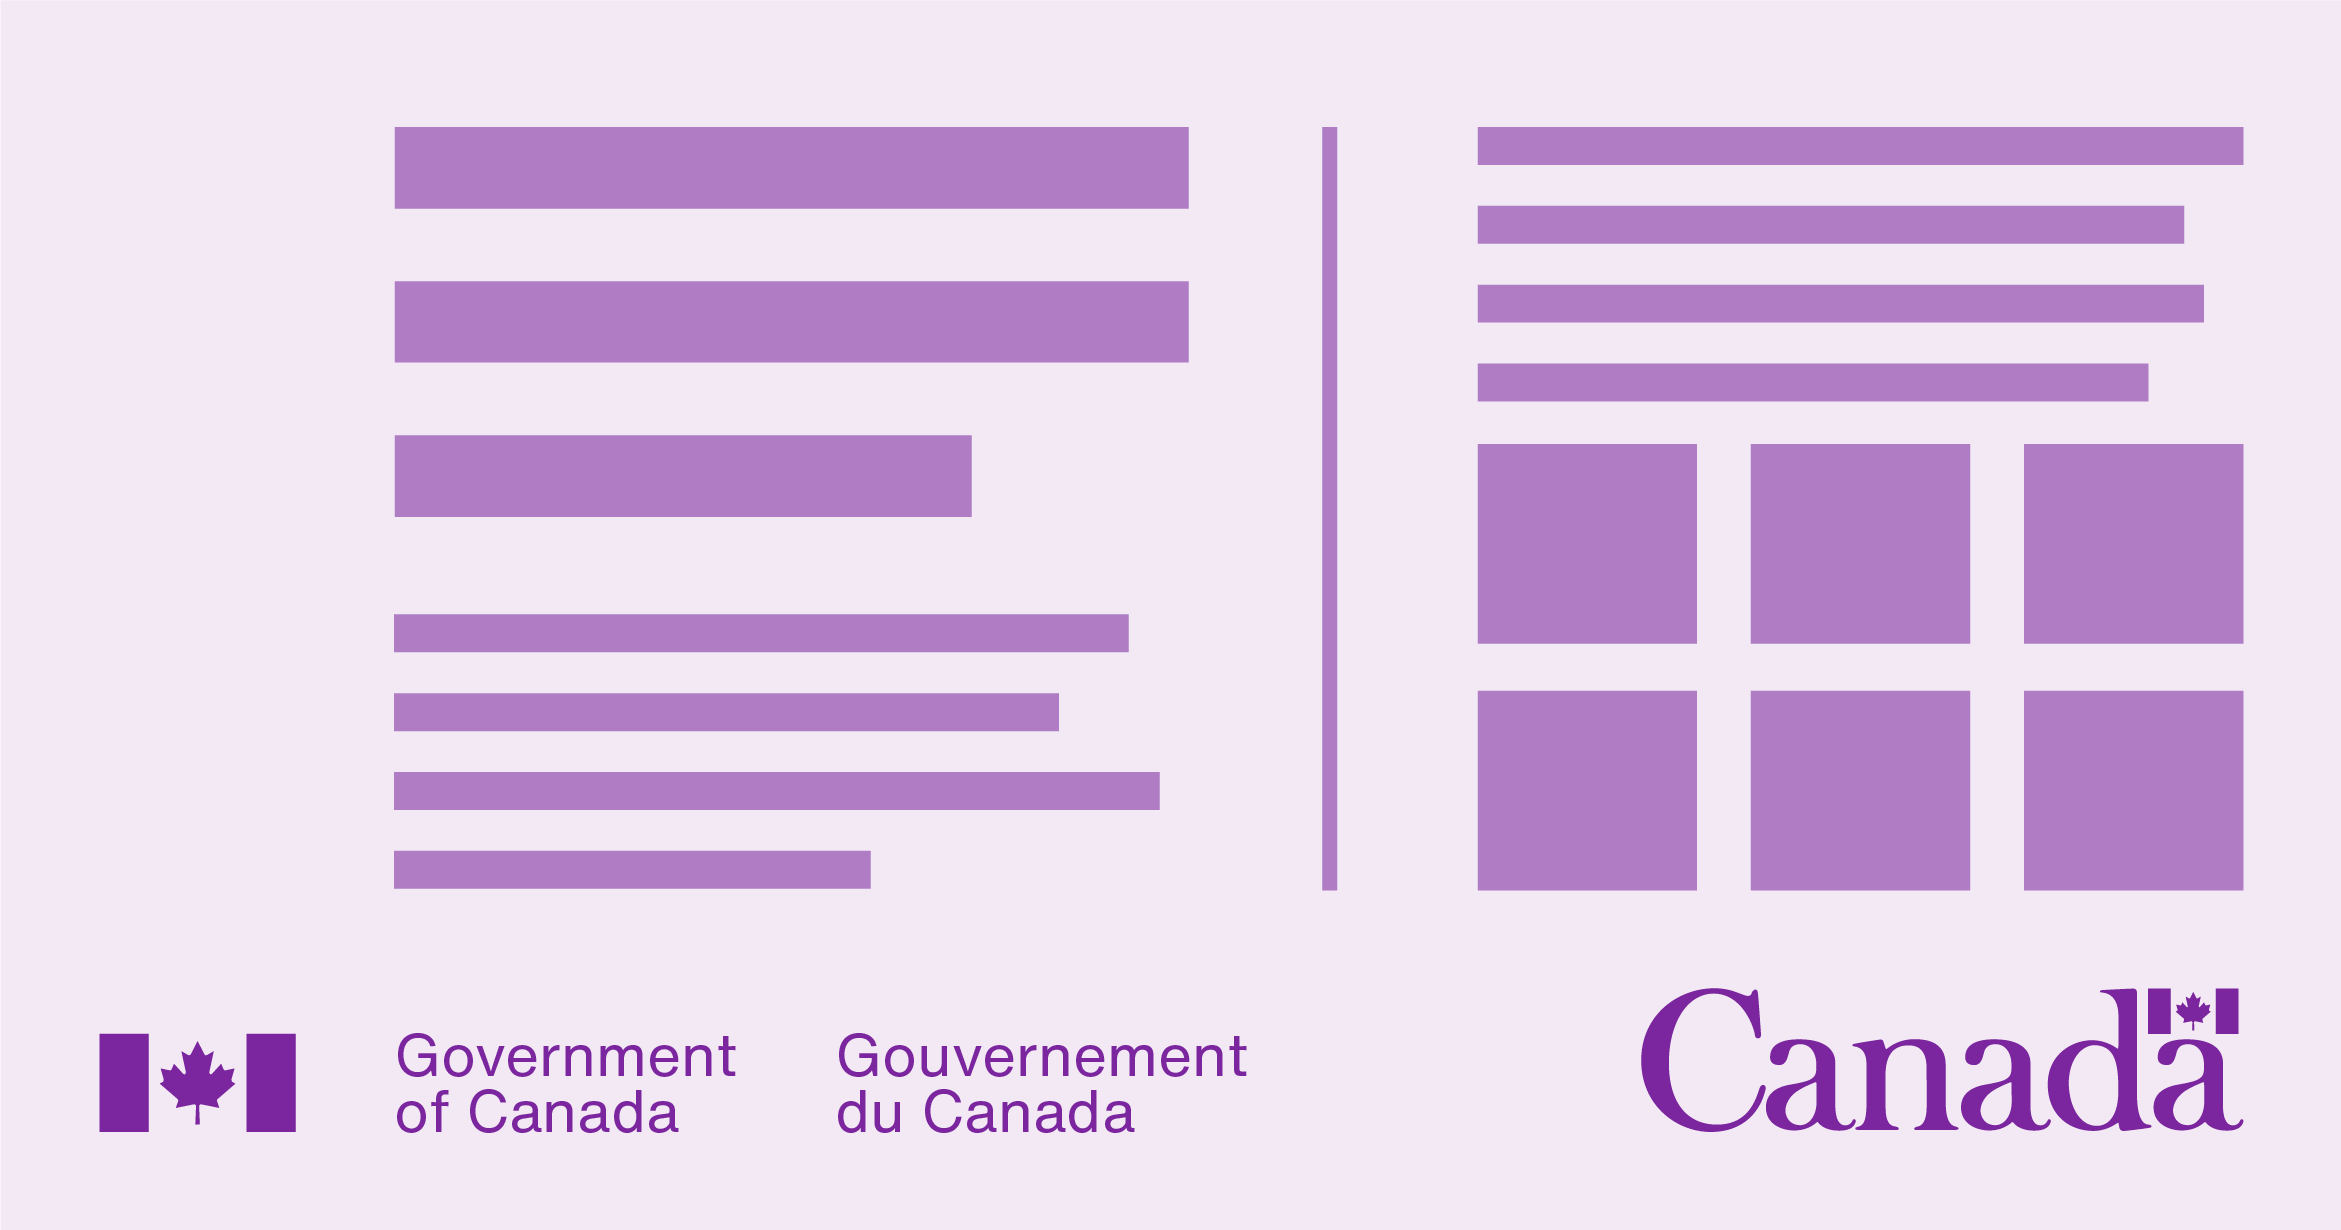 Example of a one-colour reproduction of a print product. All design elements are in purple including the Government of Canada signature and Canada wordmark.